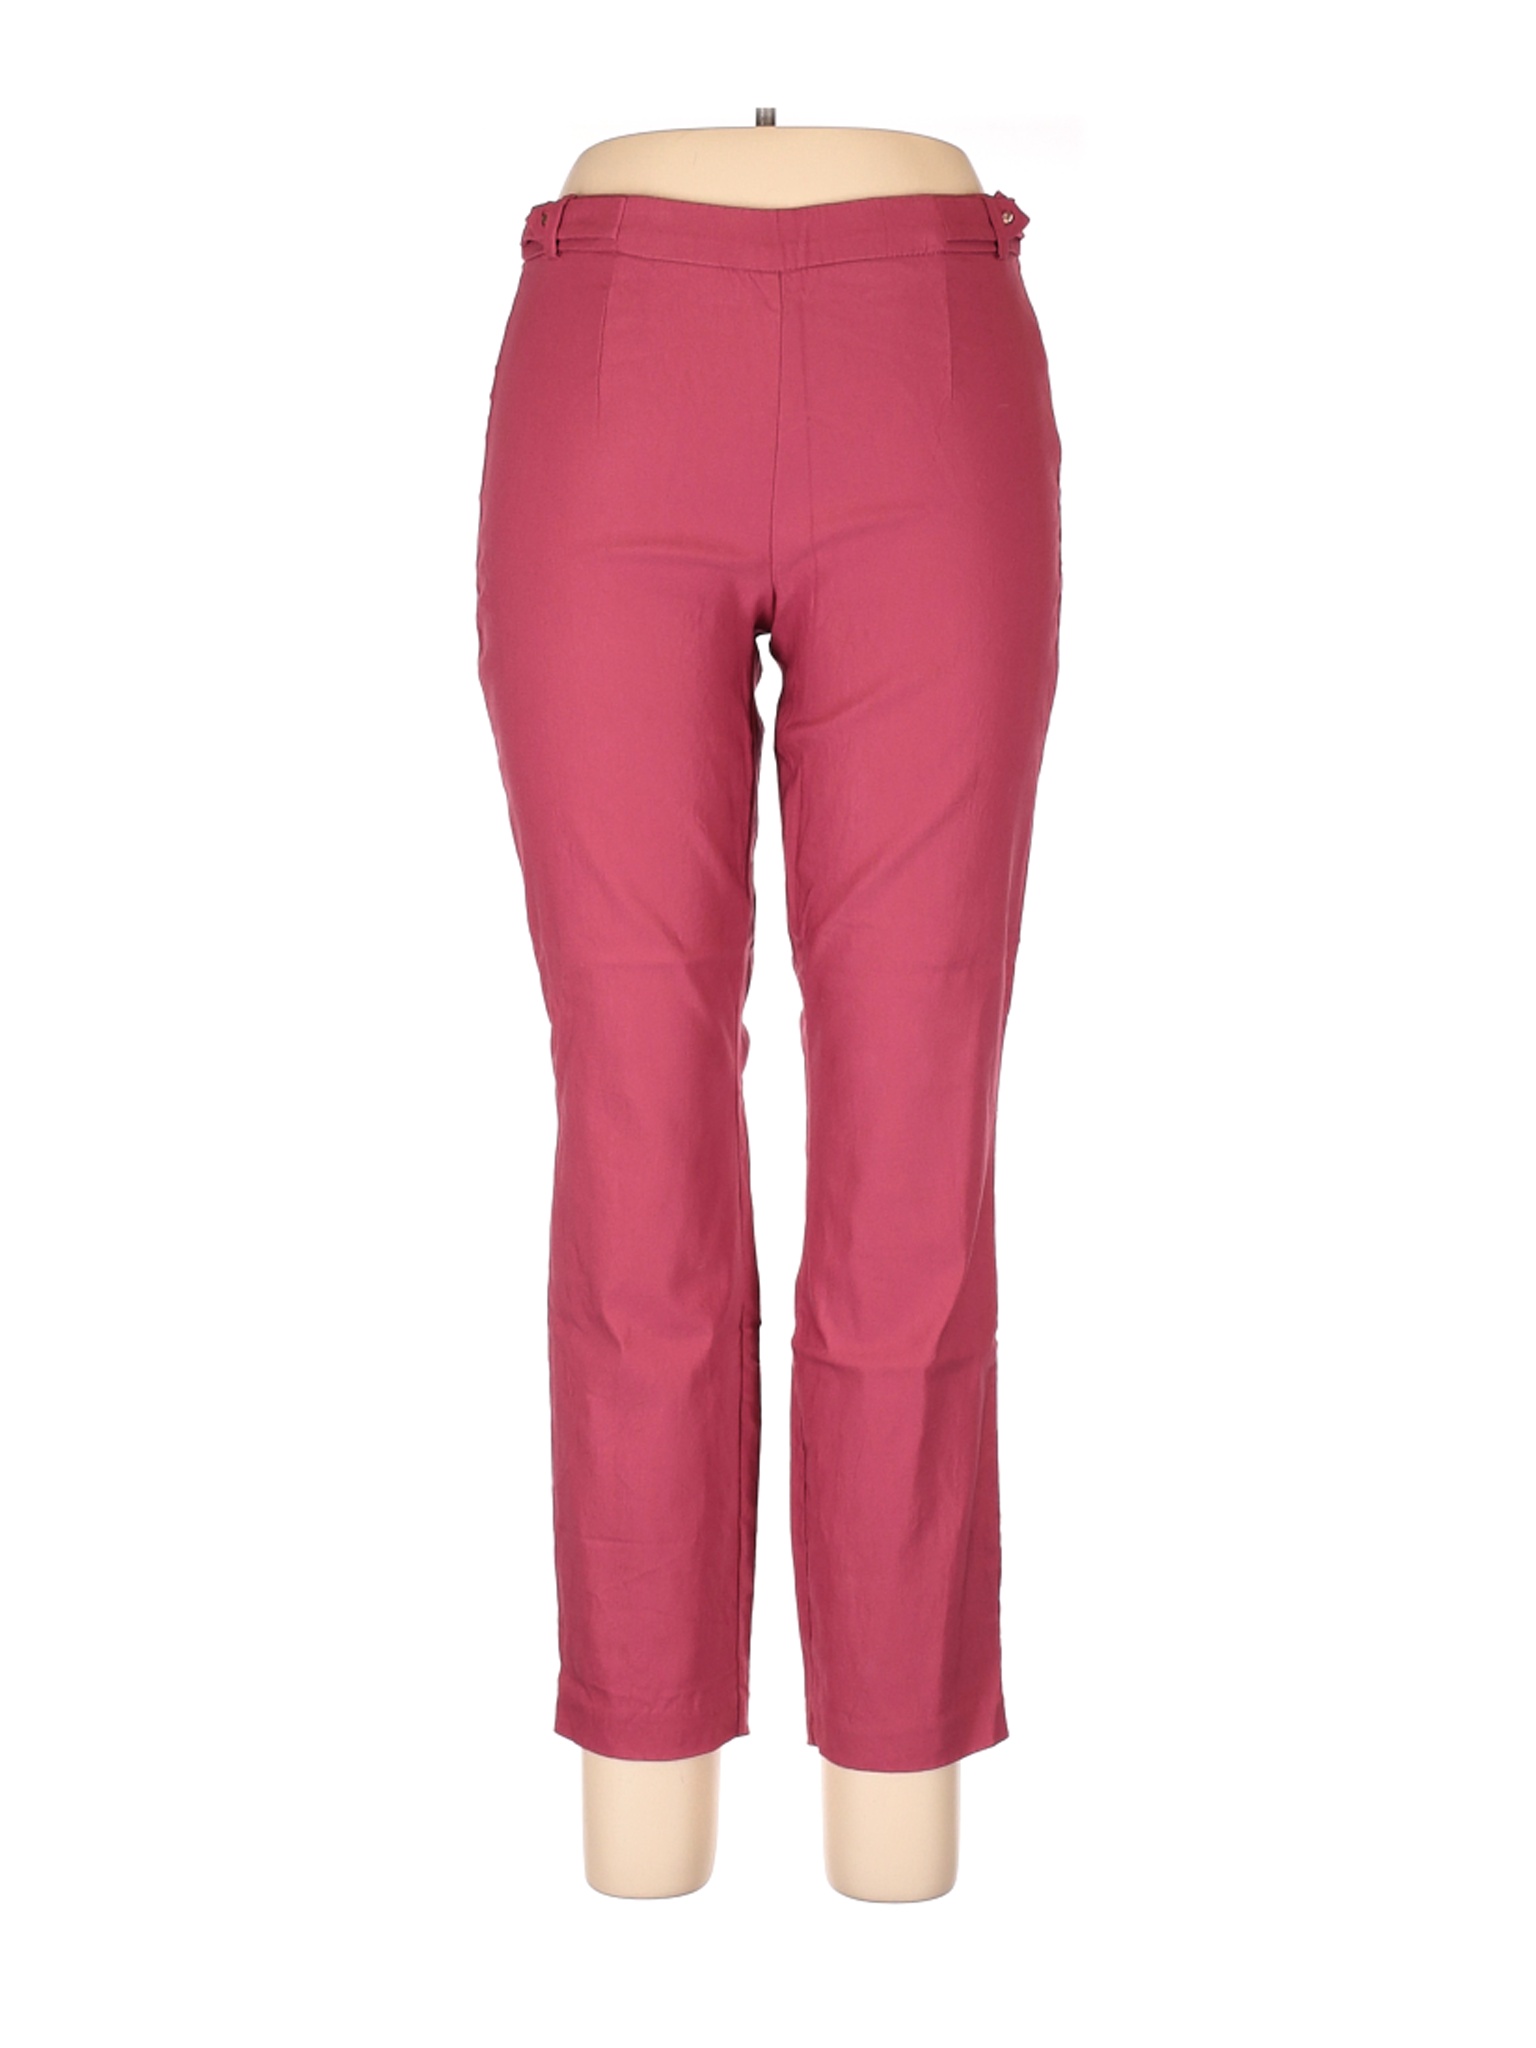 Violets & Roses Solid Pink Casual Pants 30 Waist - 83% off | thredUP